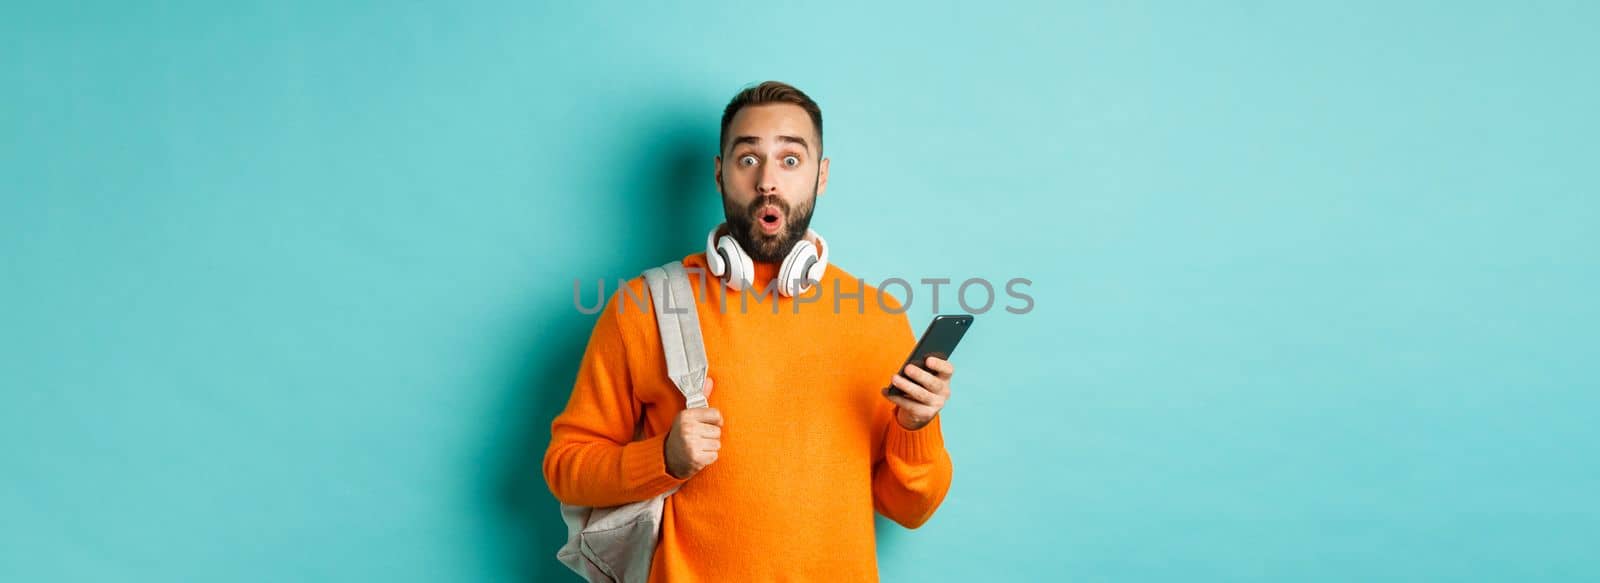 Caucasian man with headphones and backpack staring at camera surprised after reading phone message, standing over turquoise background.